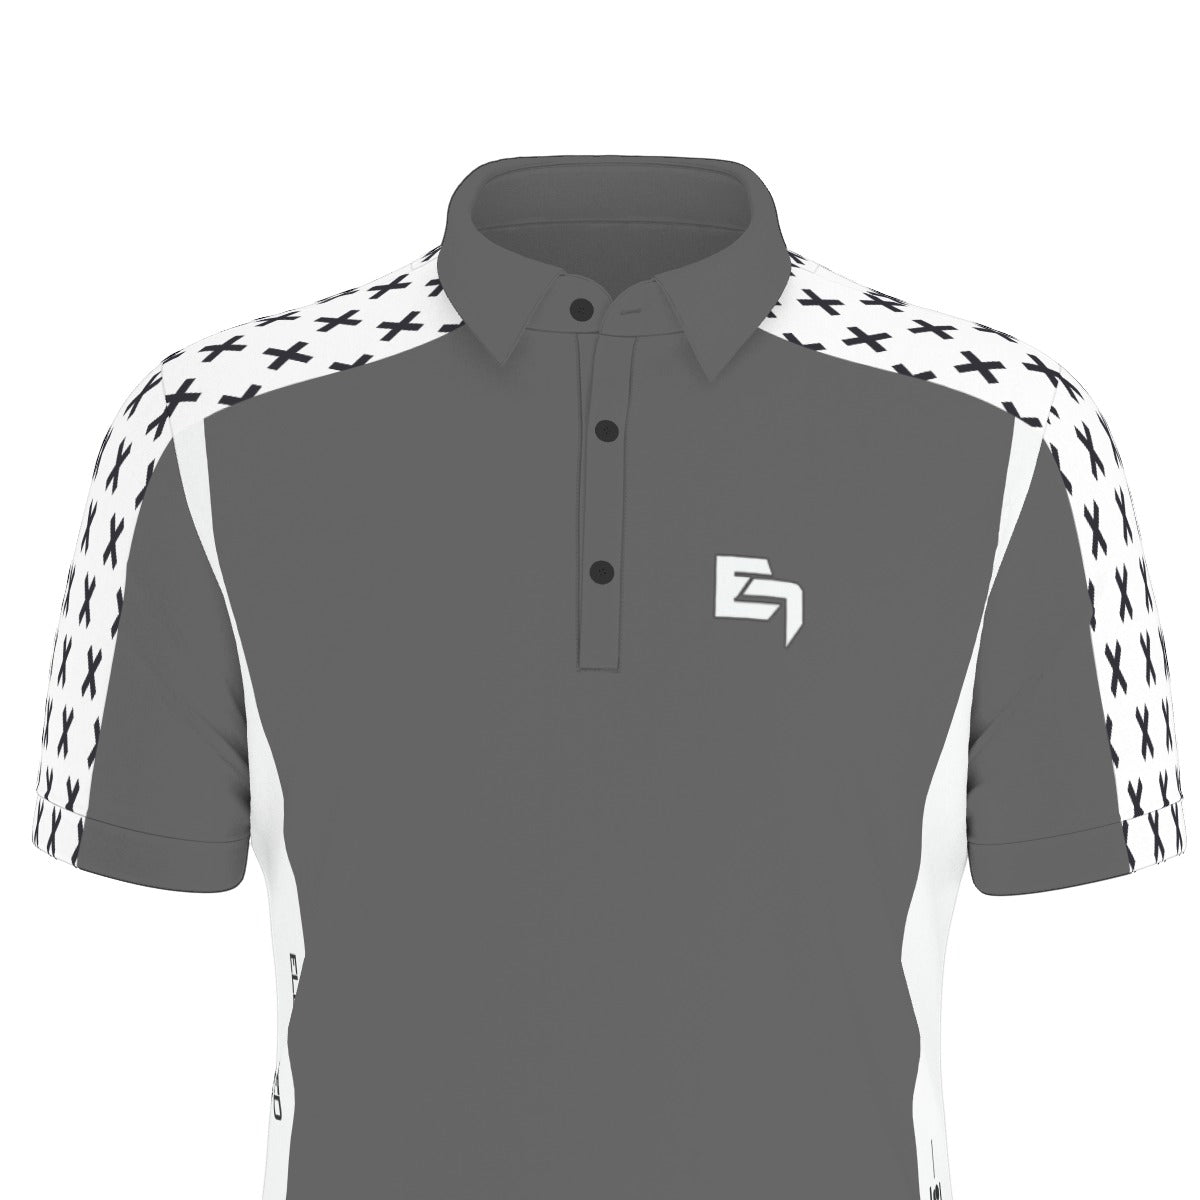 Elevated Extra Stretch Xd sleeve polo